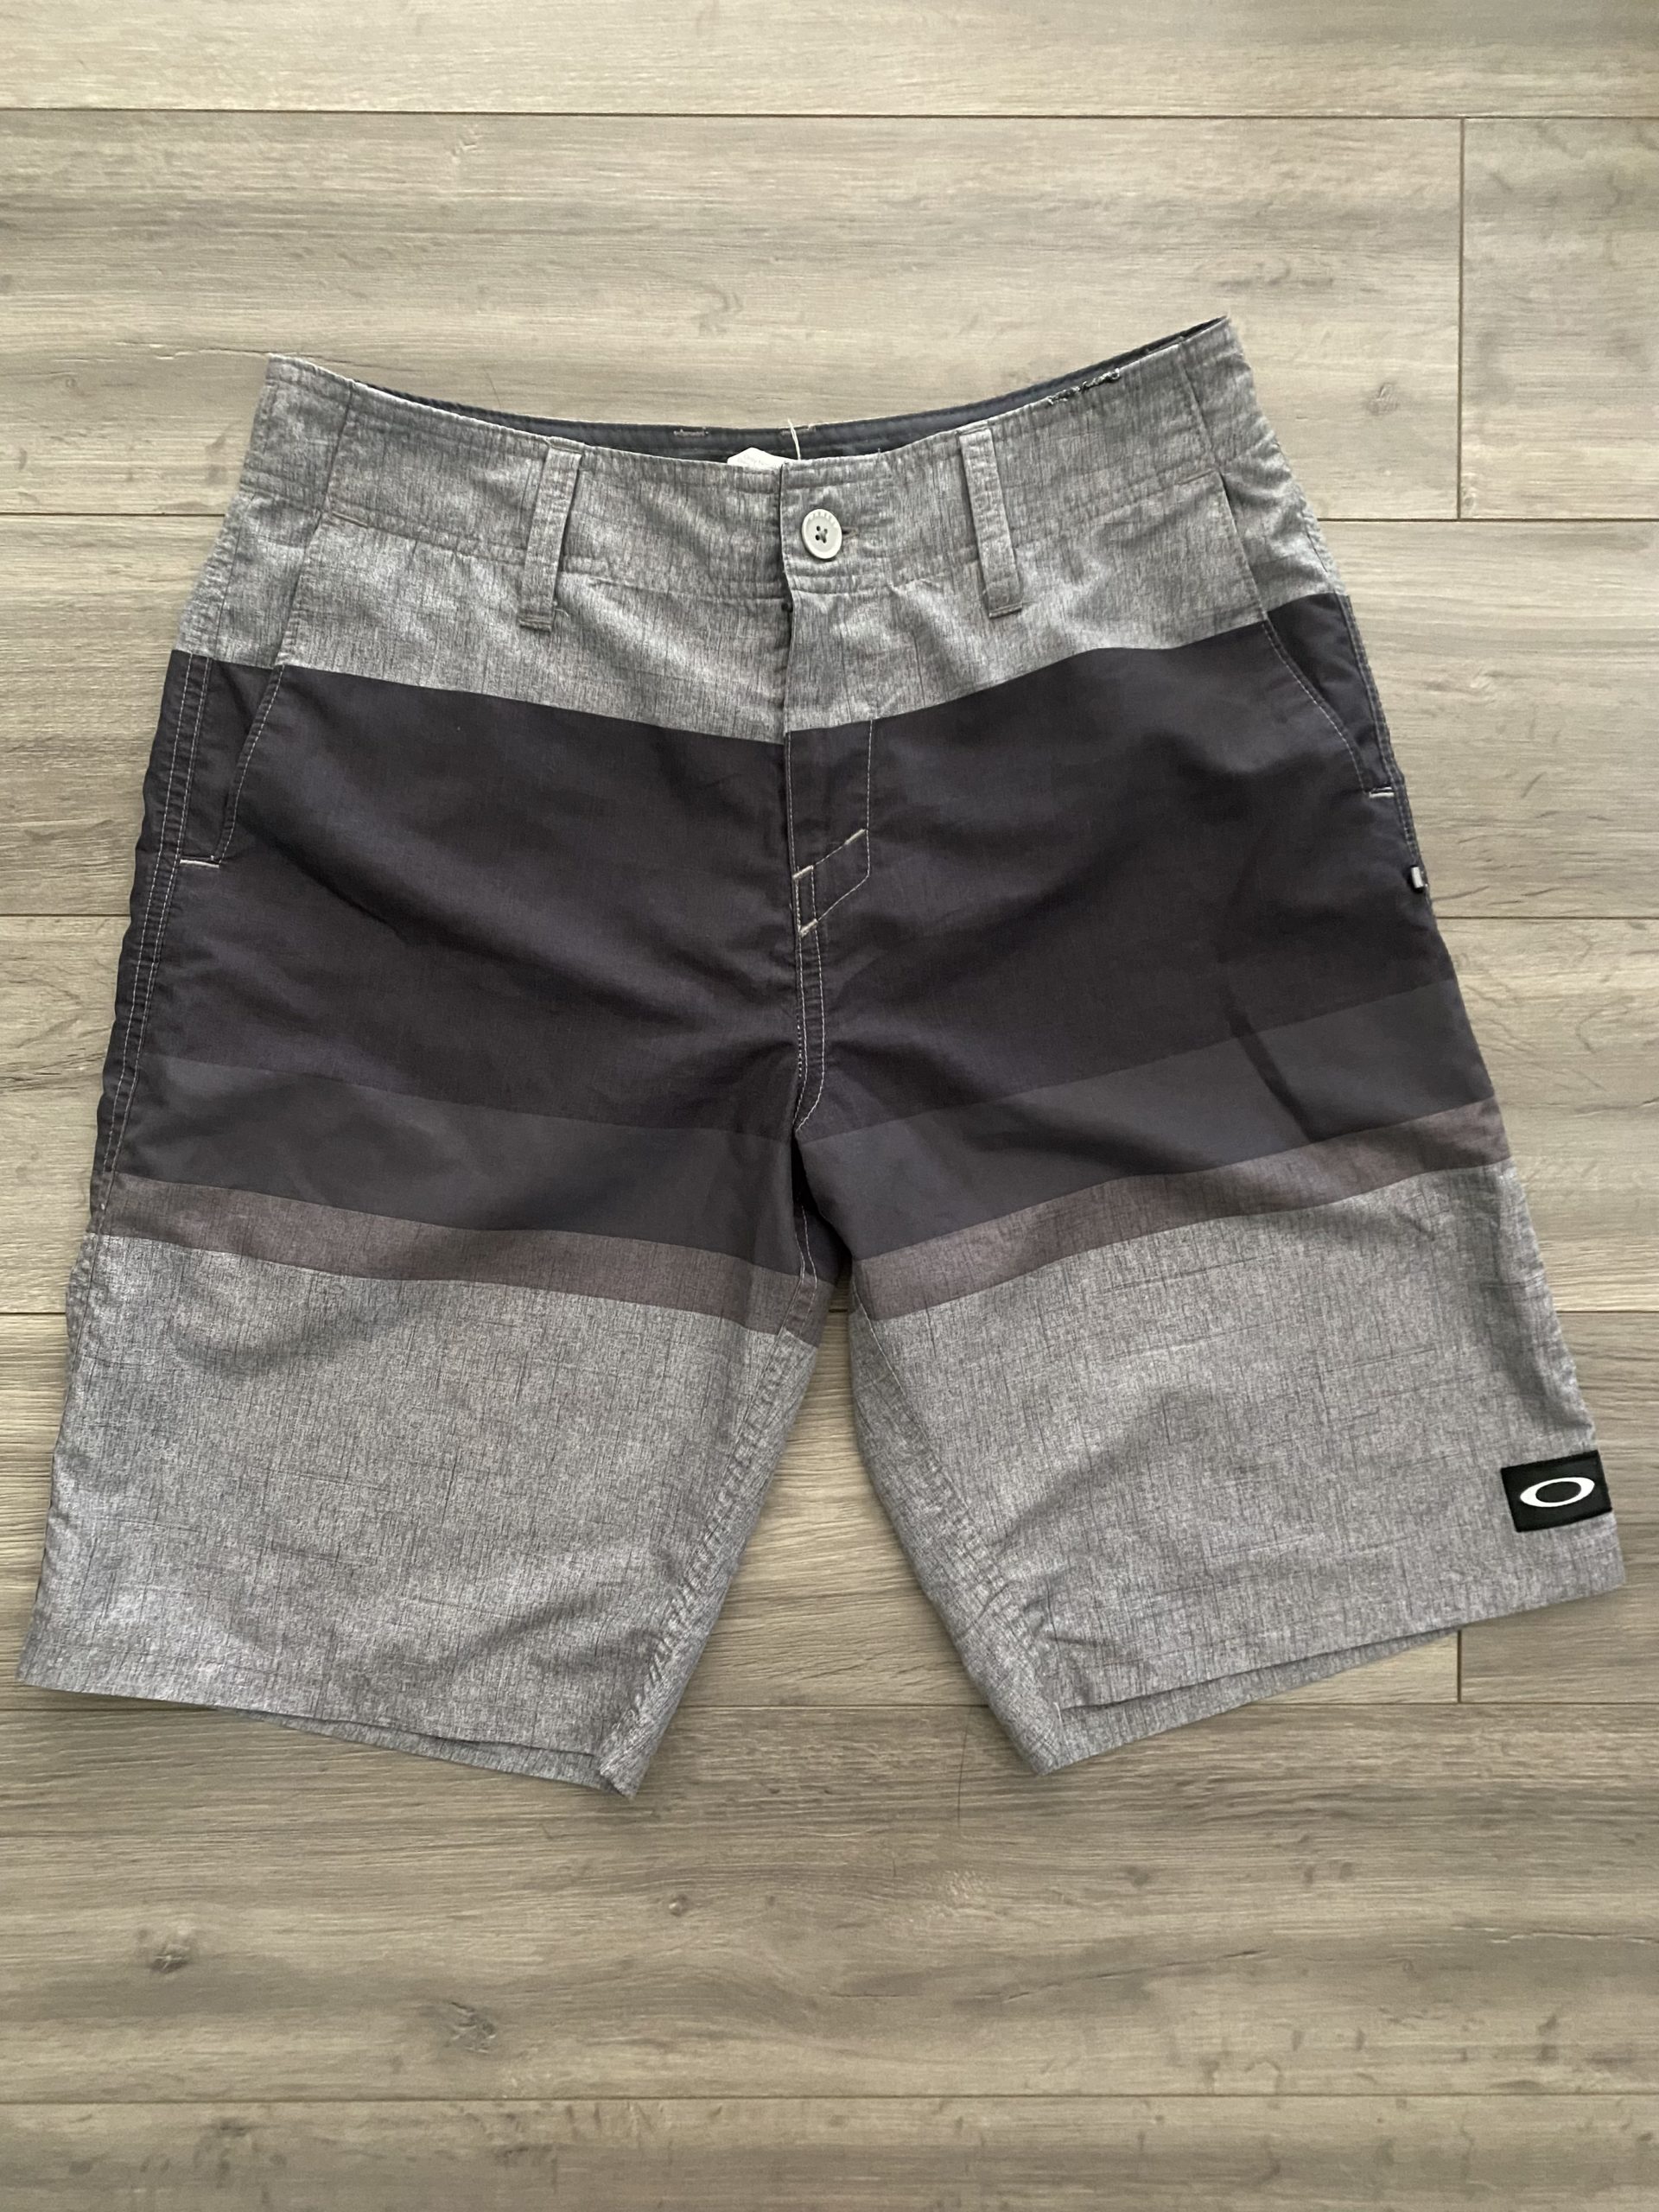 Oakley Mens Grey Board Shorts Size 30 ⋆ Twice as Nice Consignment Boutique